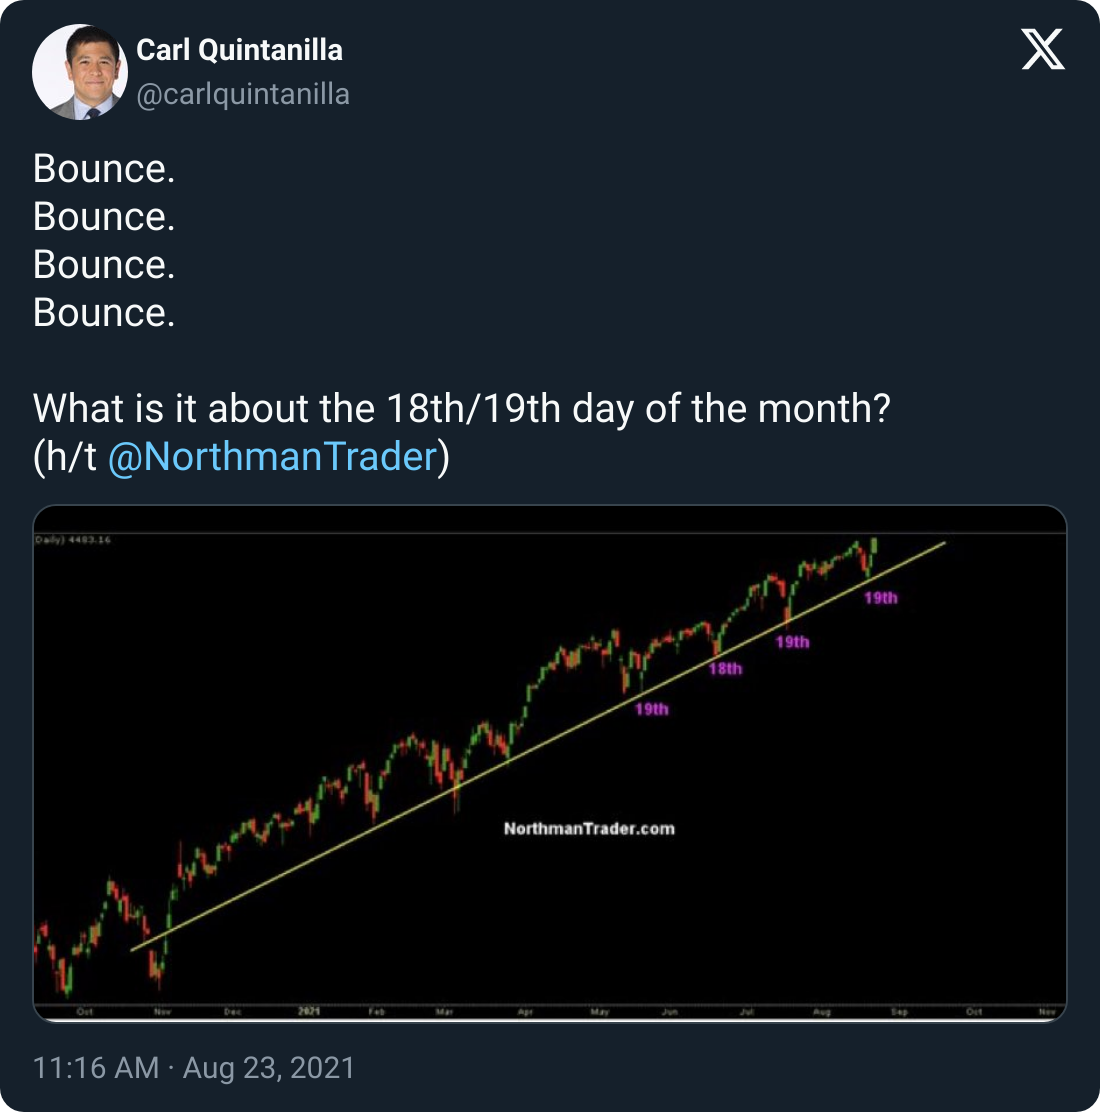 Carl Quintanilla's tweet in August 2021 on the market consistently bouncing on OpEx.